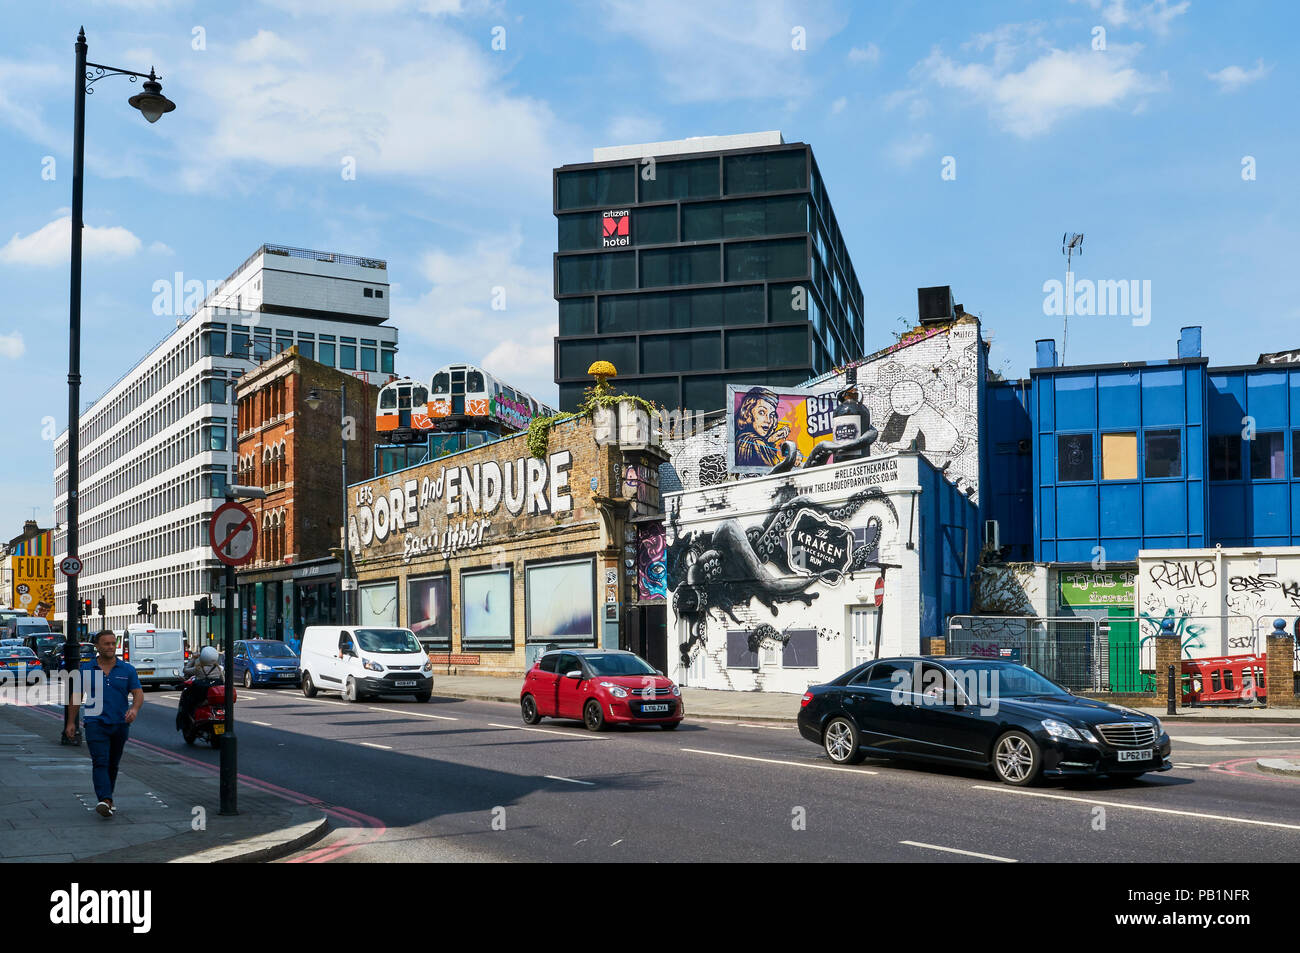 Buildings and murals on Great Eastern Street, Shoreditch, East London, UK Stock Photo